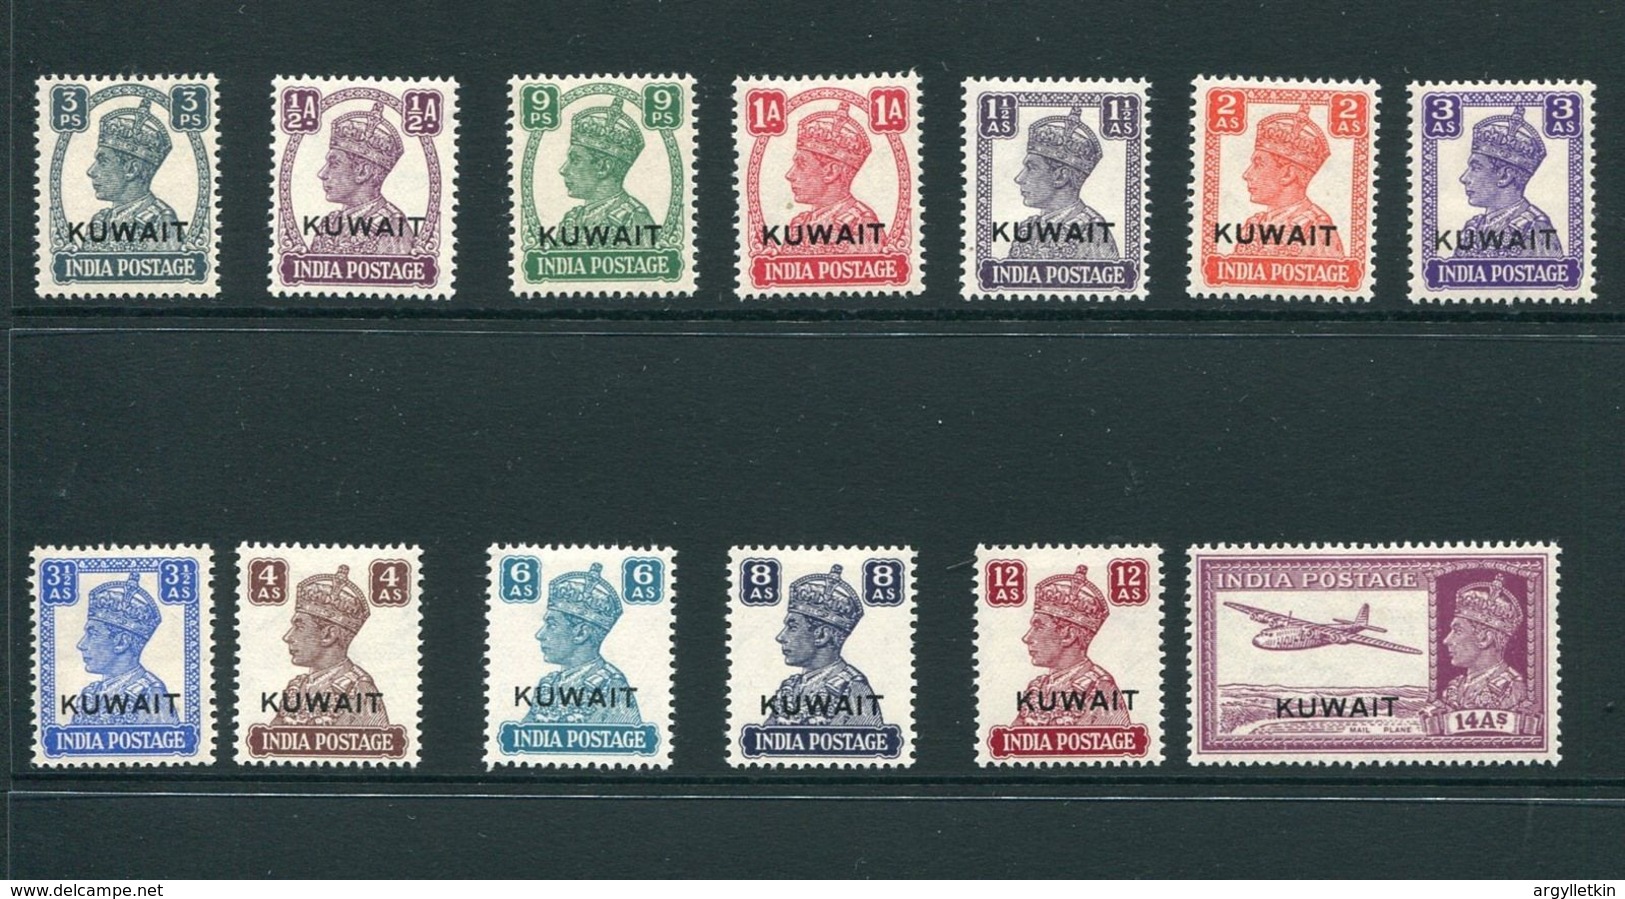 BAHRAIN AND KUWAIT GEORGE SIXTH STAMPS MOUNTED MINT - Bahrain (...-1965)